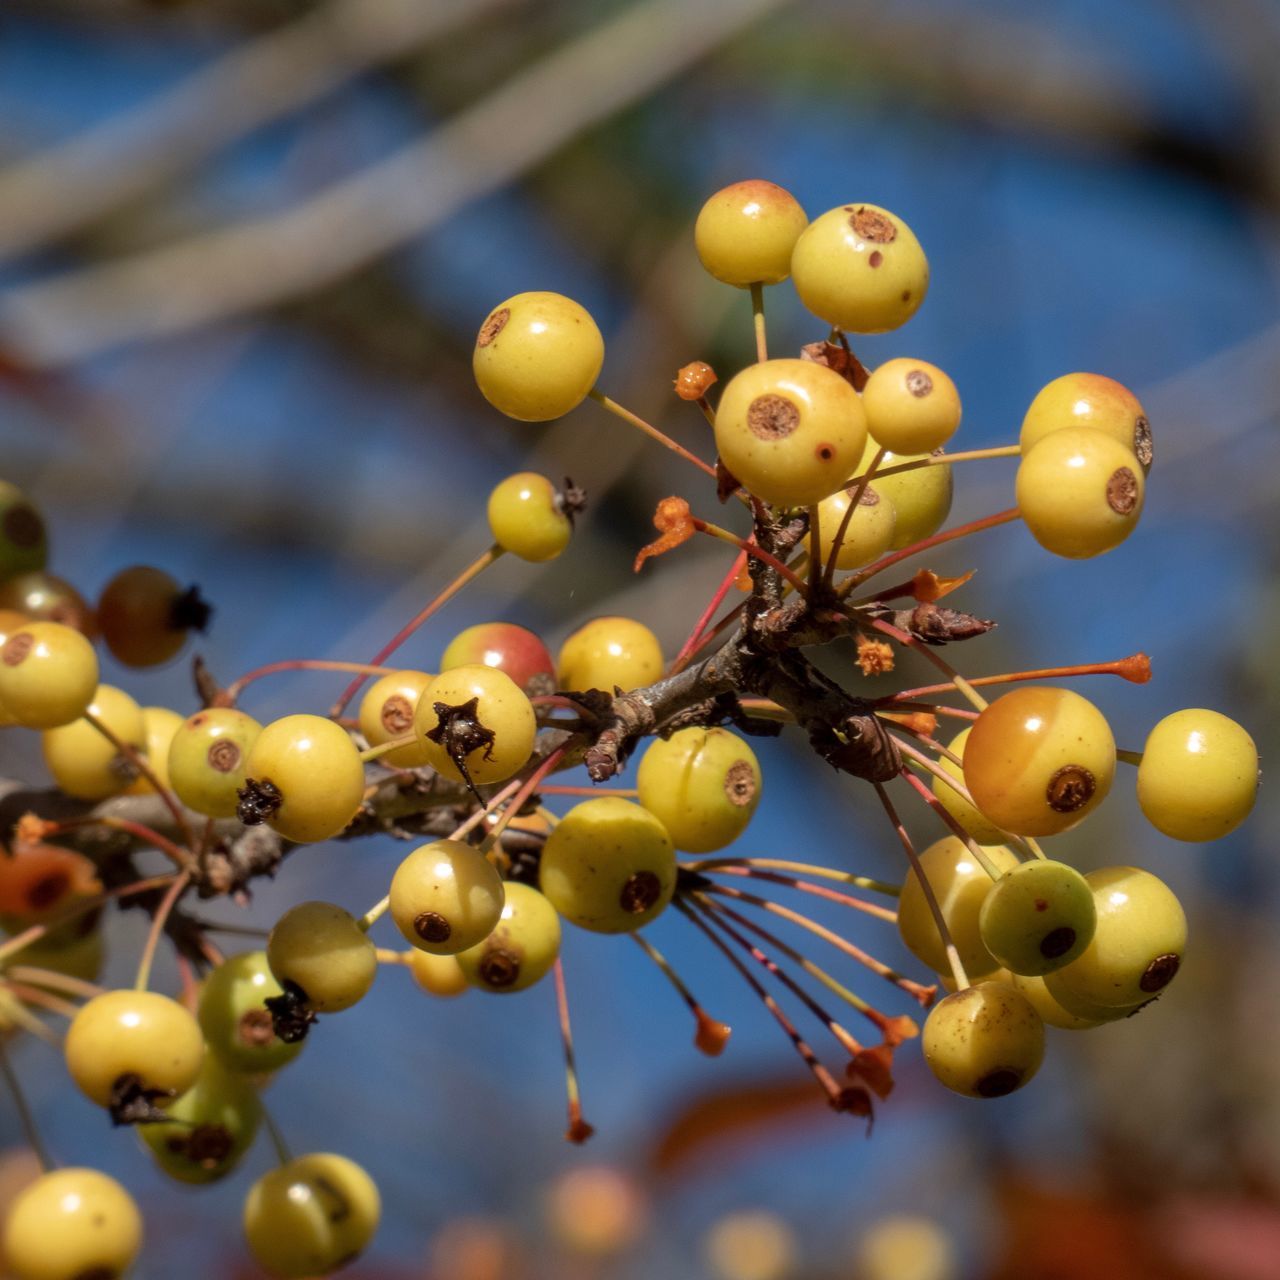 fruit, close-up, focus on foreground, no people, plant, healthy eating, food, food and drink, growth, nature, berry fruit, tree, freshness, day, beauty in nature, branch, selective focus, outdoors, low angle view, yellow